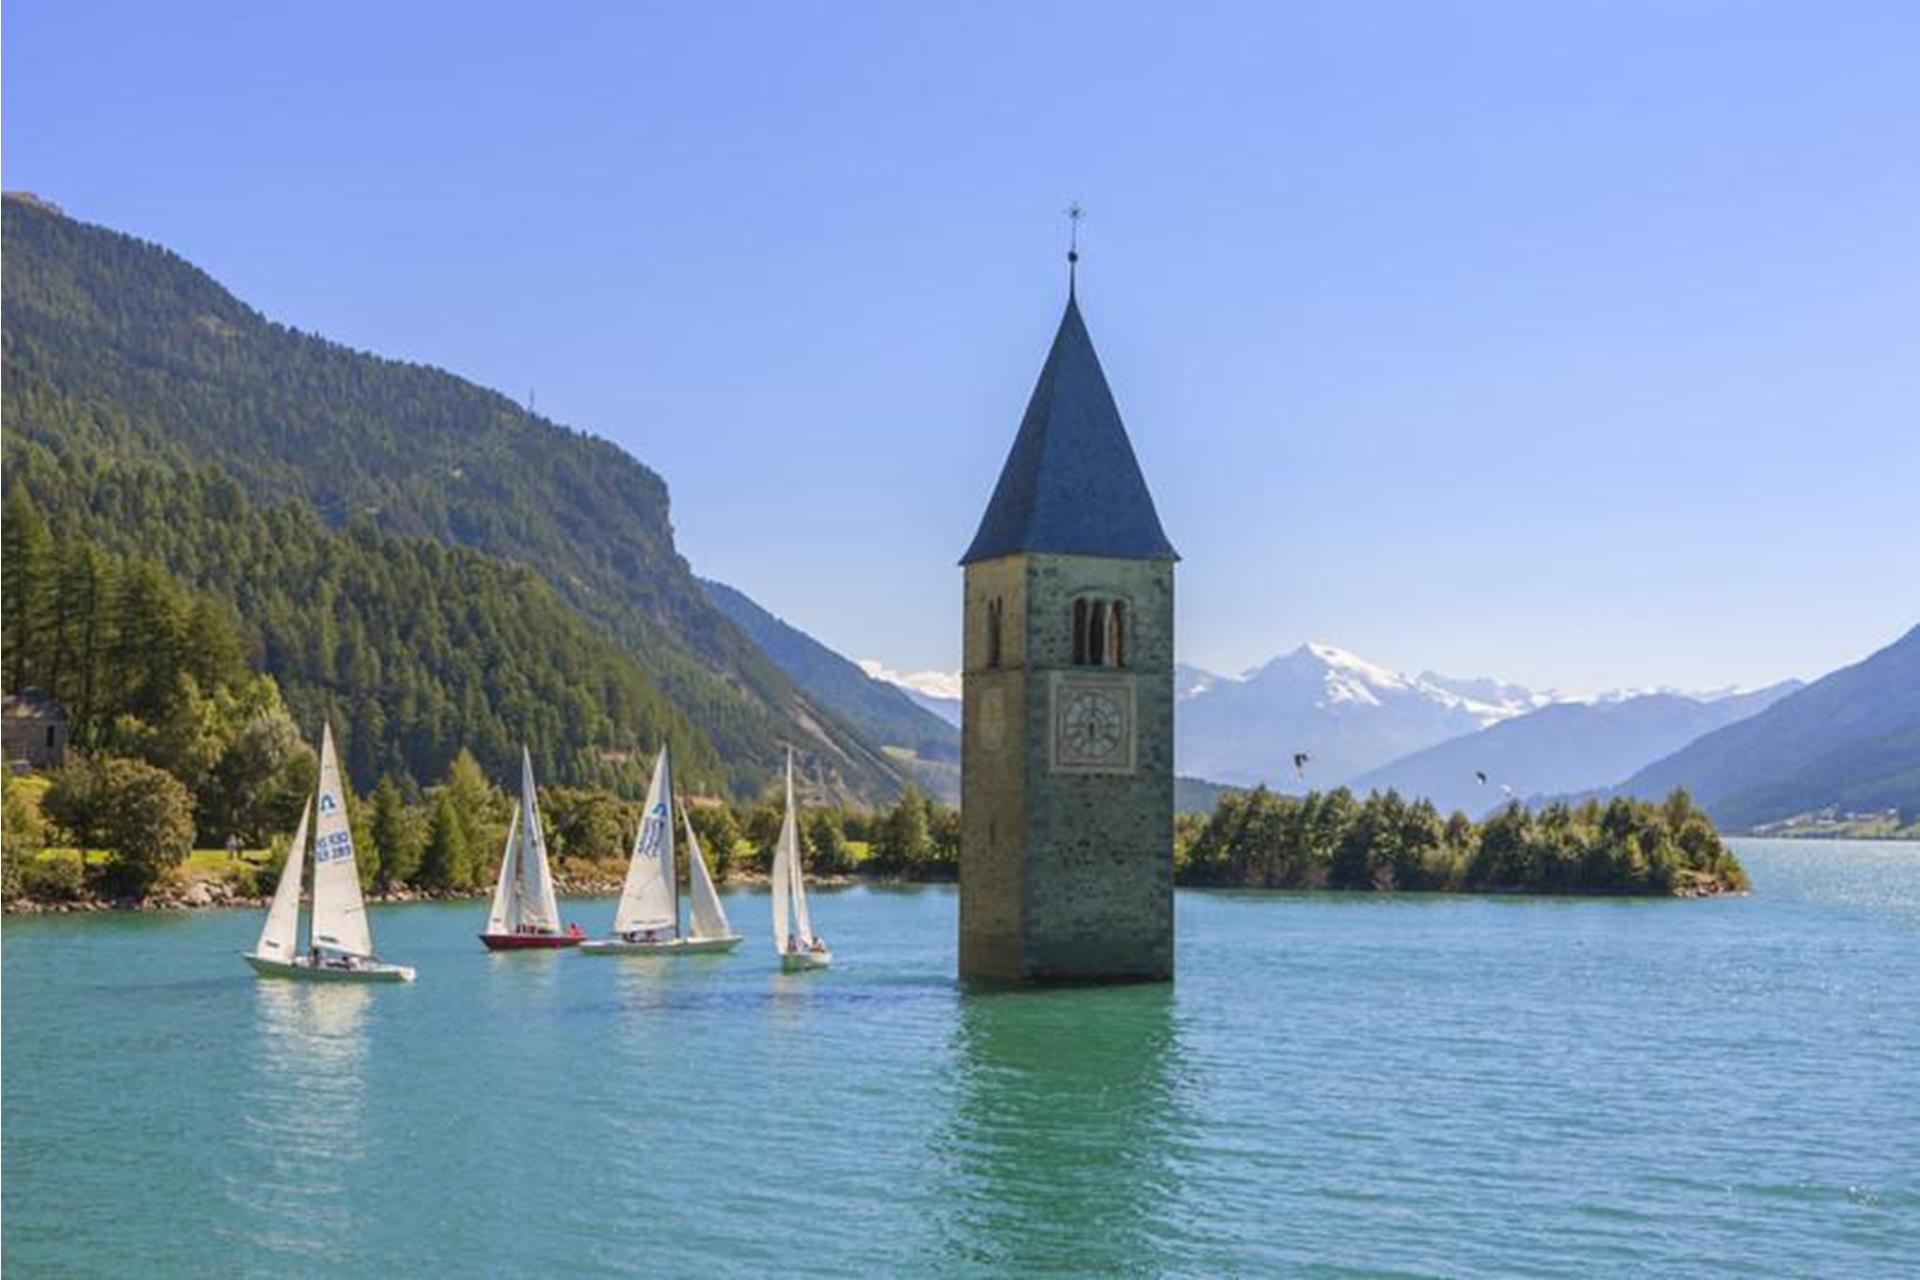 Lake Resia with submerged bell tower surrounded by sailboats